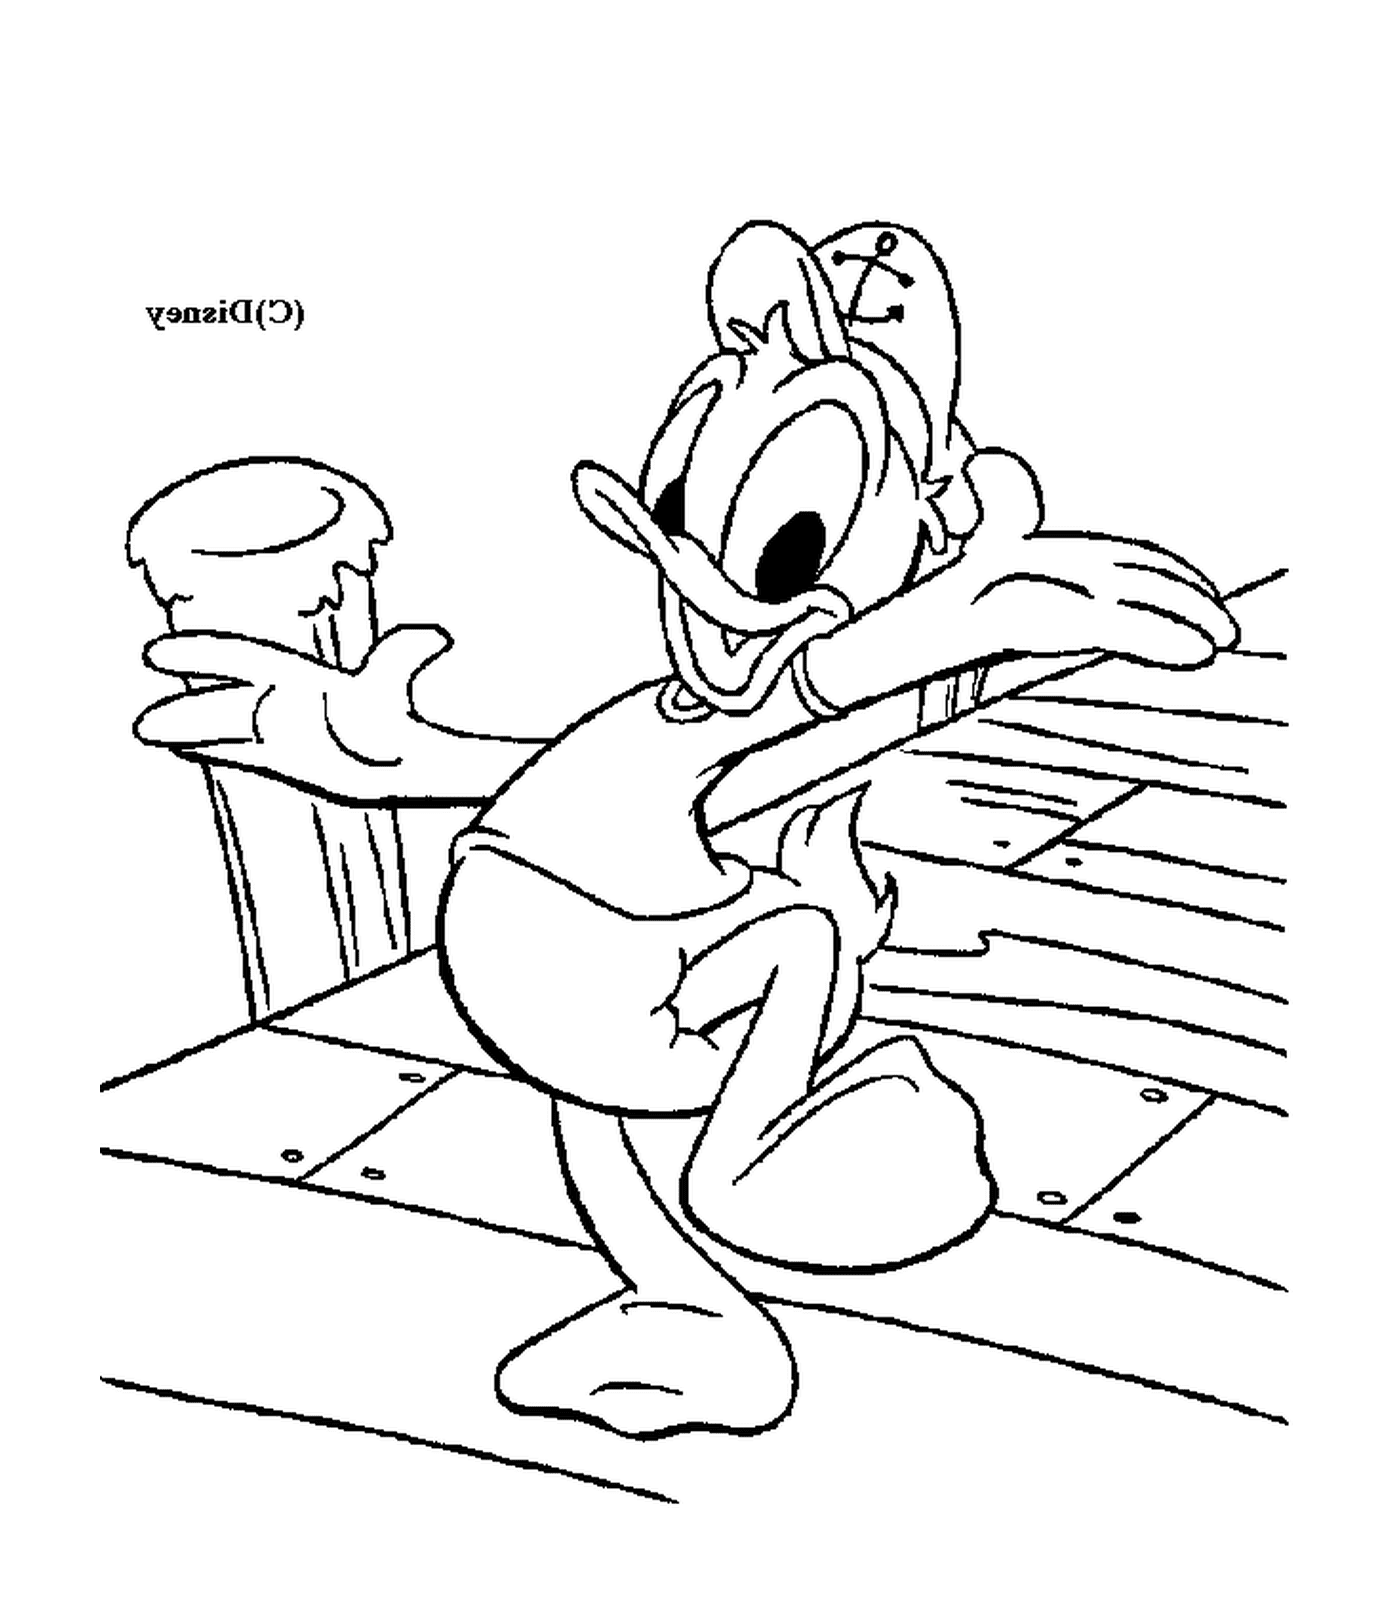  Donald, a sailor resting on a bench 